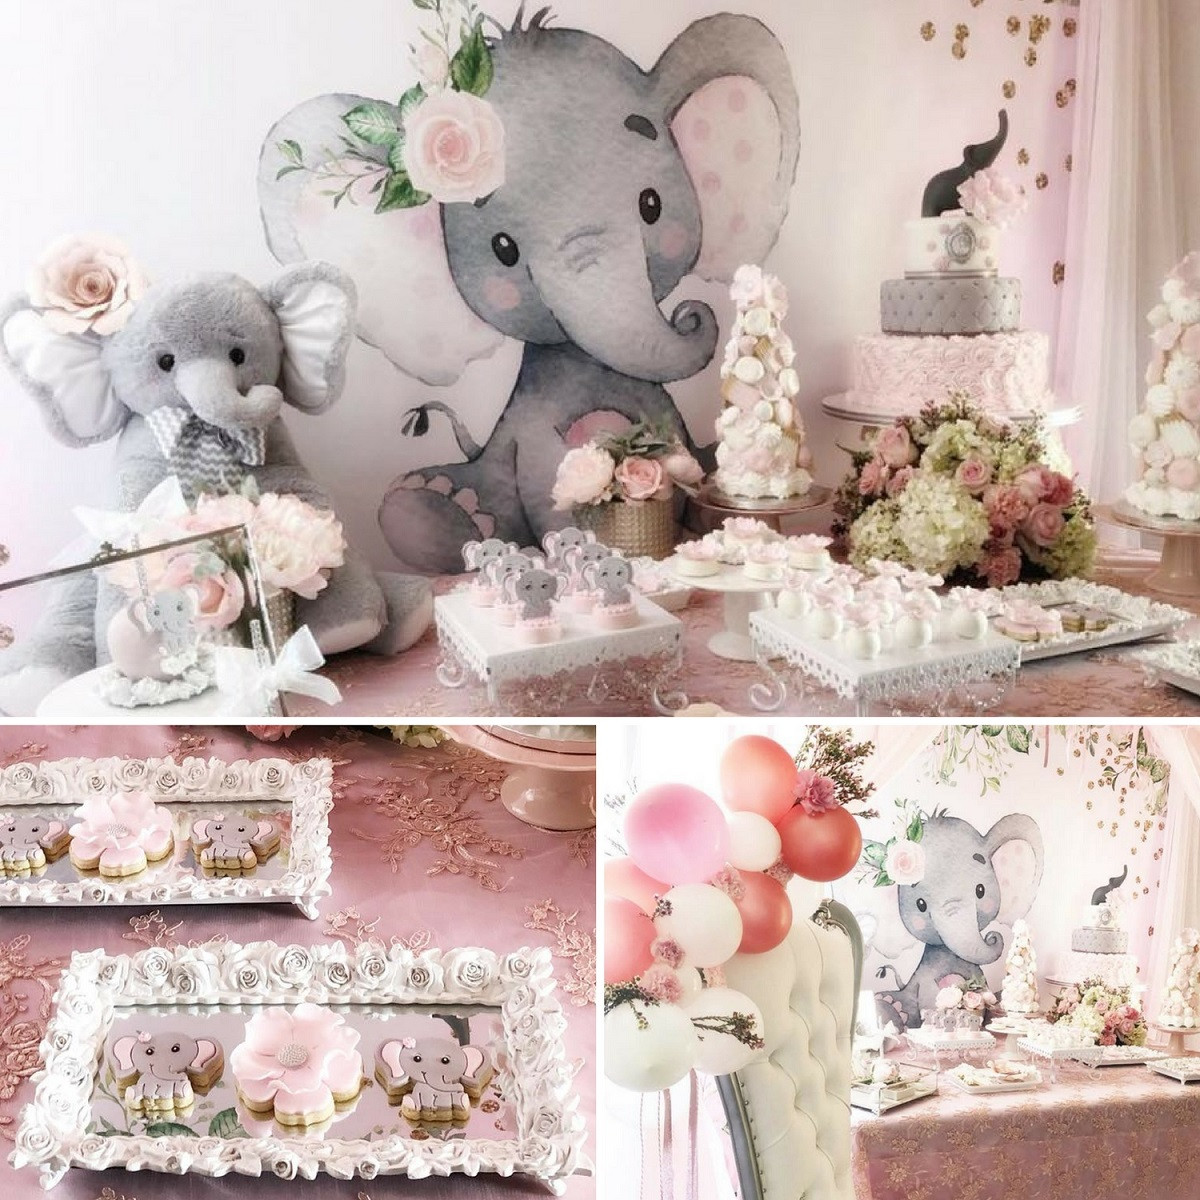 Elephant Baby Shower Decoration Ideas
 Pink And Gray Elephant Baby Shower Baby Shower Ideas